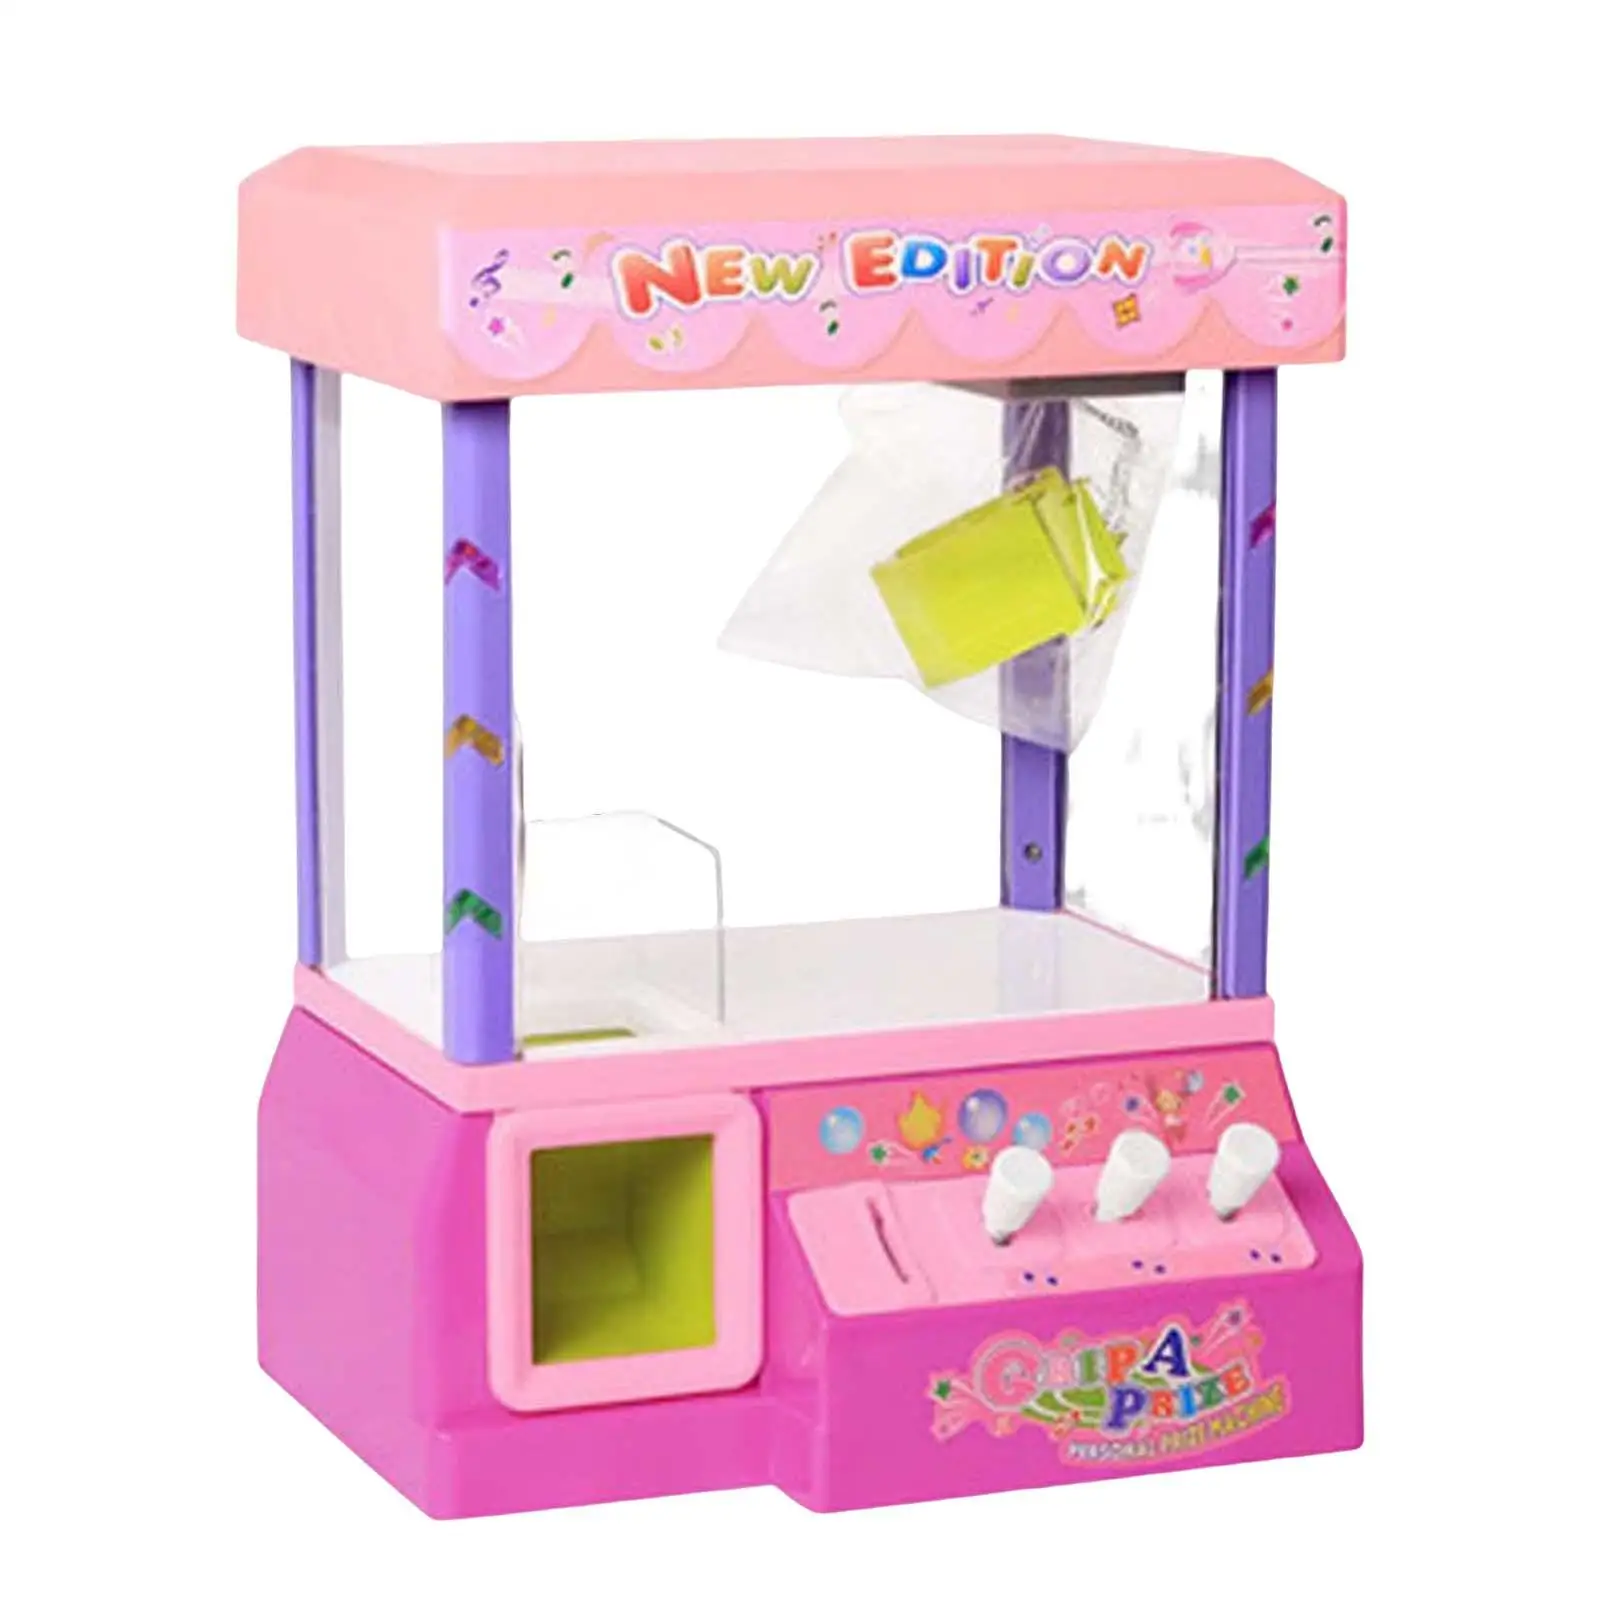 Electronic DIY Children Doll Machine Coin Operated Play Game Portable Crane Machines Toy